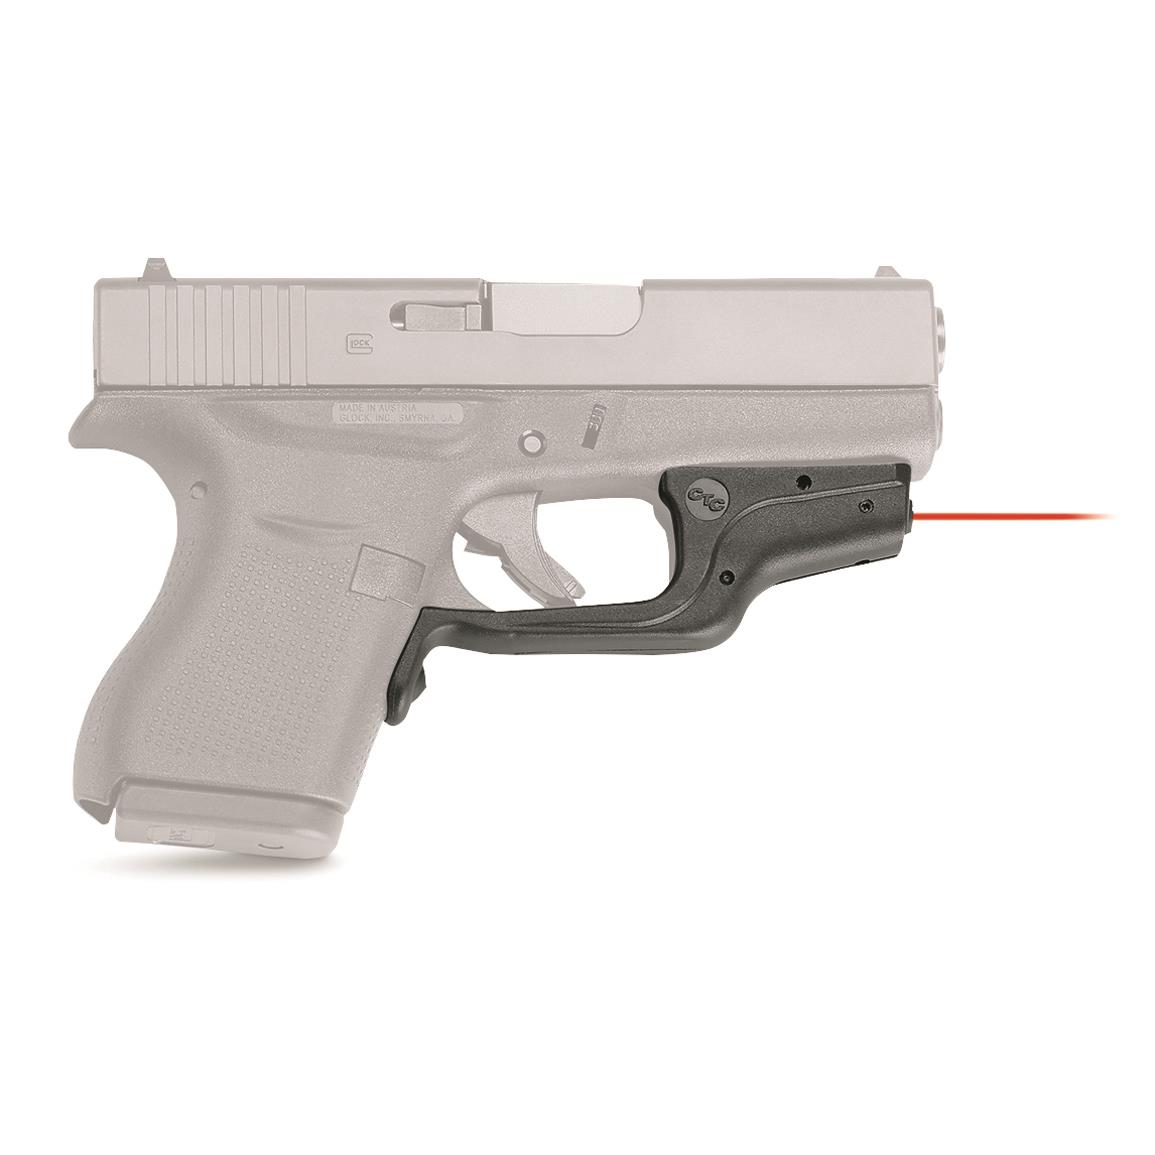 Crimson Trace LG-443 Laserguard Red Laser for Glock 42, 43, 43X and 48